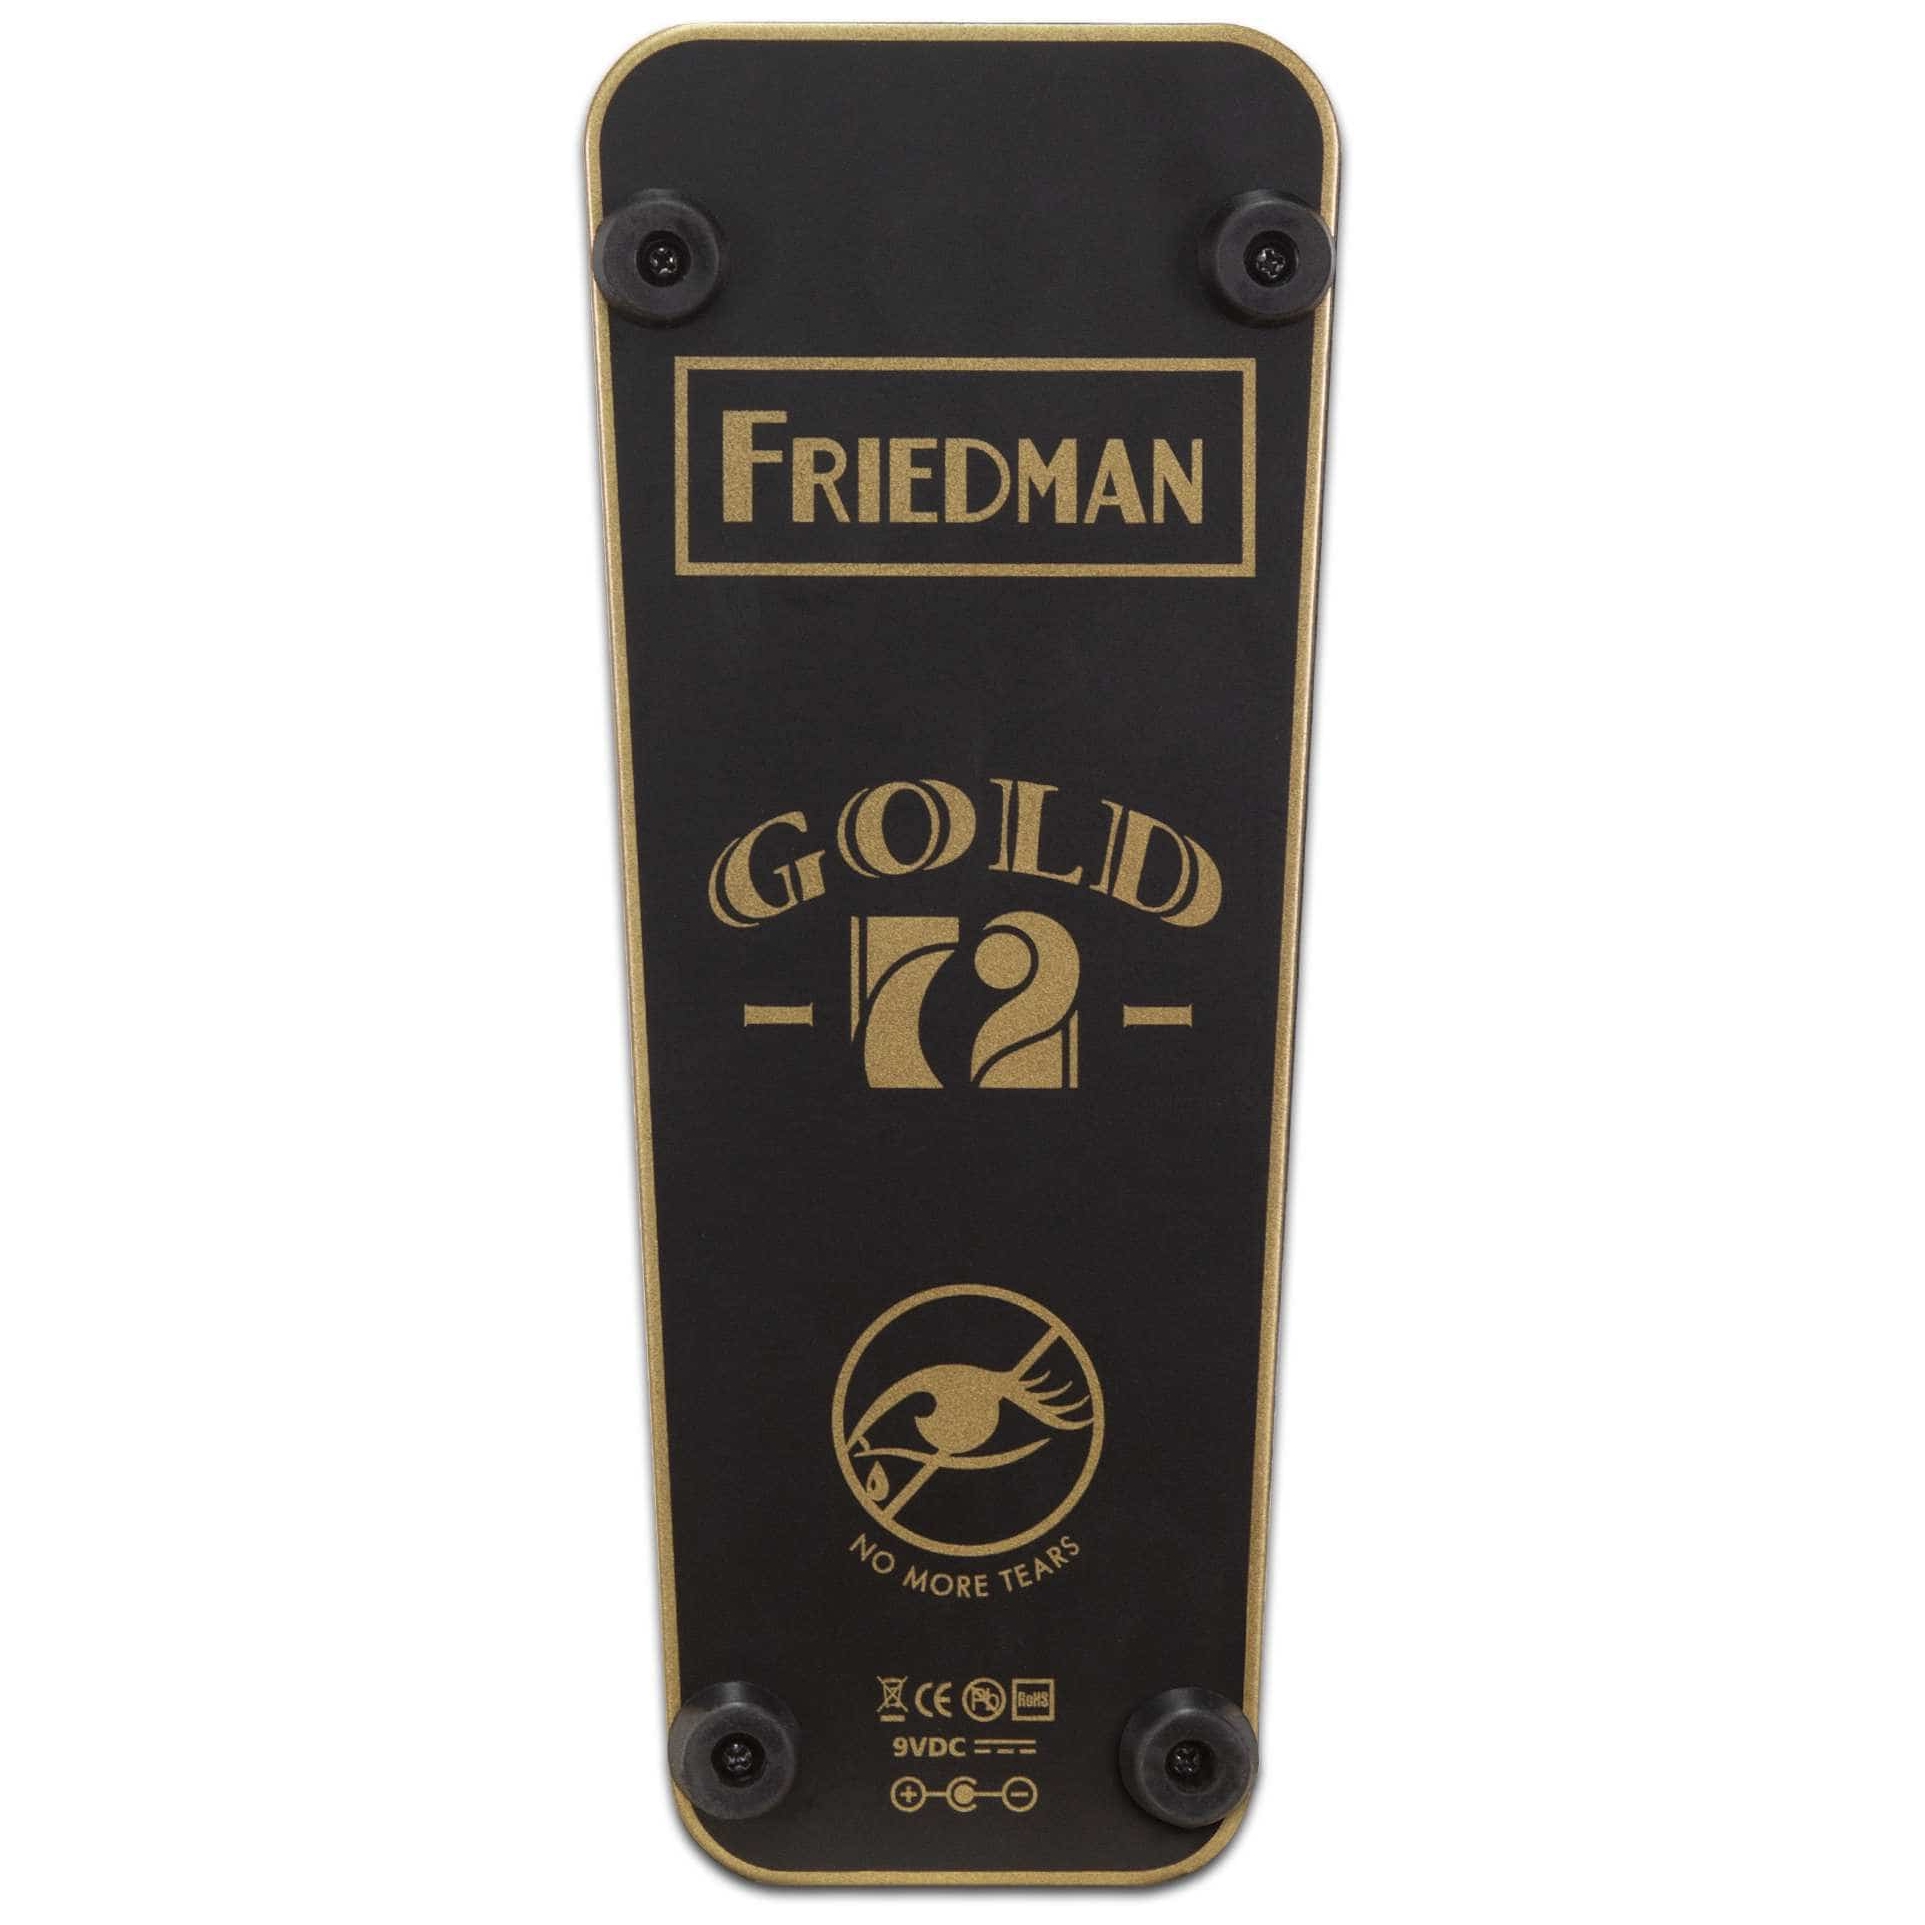 Friedman Amplification No More Tears Gold 72 Wah Pedal B-Ware